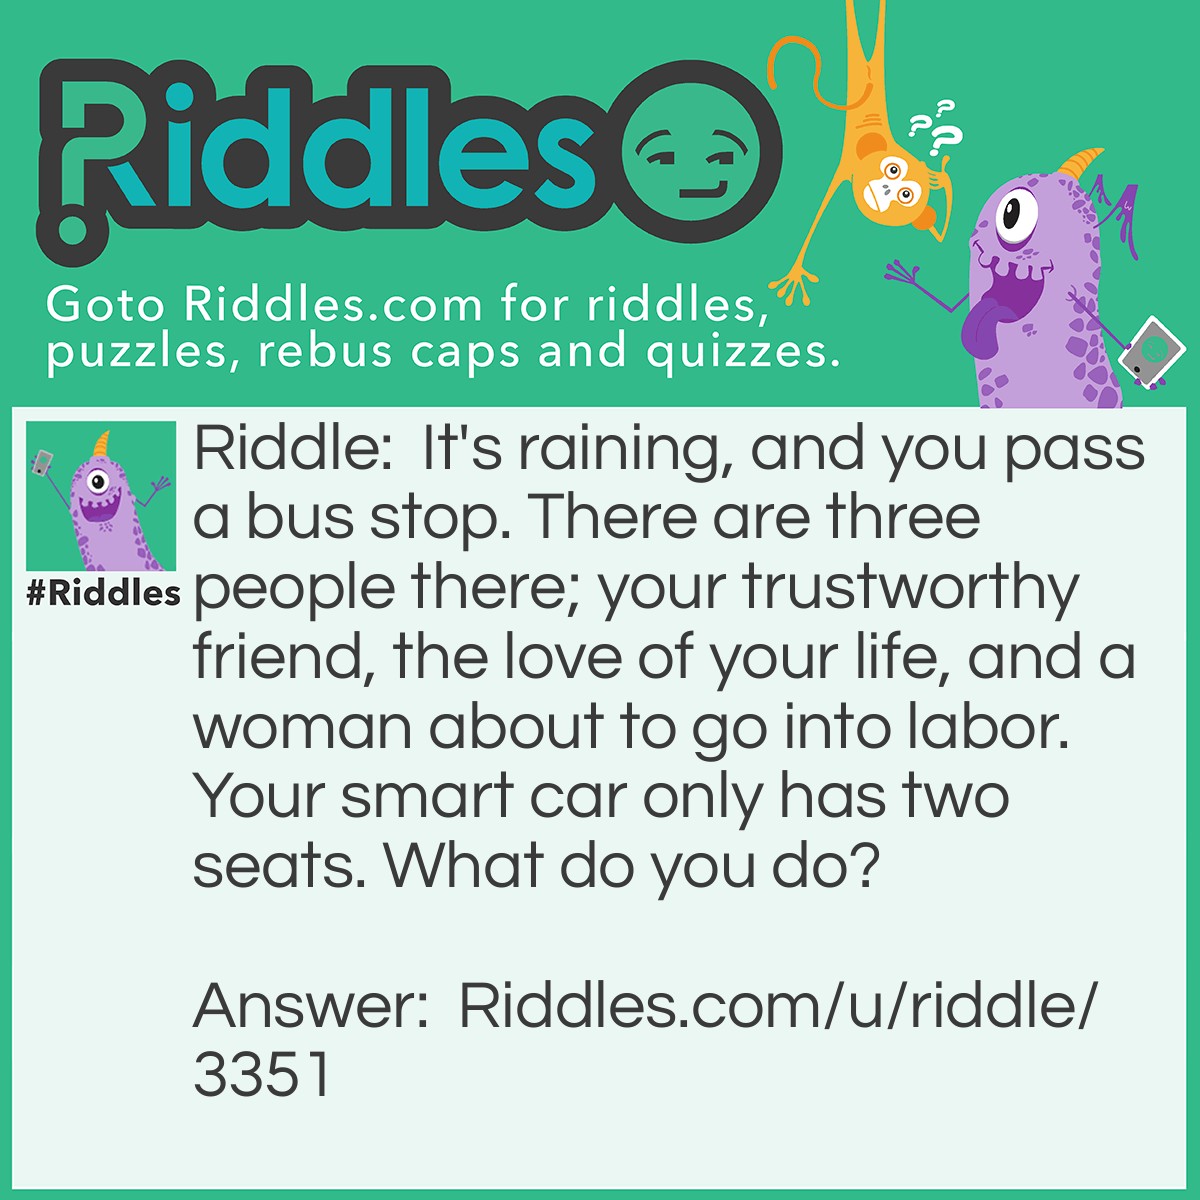 Riddle: It's raining, and you pass a bus stop. There are three people there; your trustworthy friend, the love of your life, and a woman about to go into labor. Your smart car only has two seats. What do you do? Answer: You first give your keys to your friend and let them take the woman to a hospital, then you wait for the bus with your love.